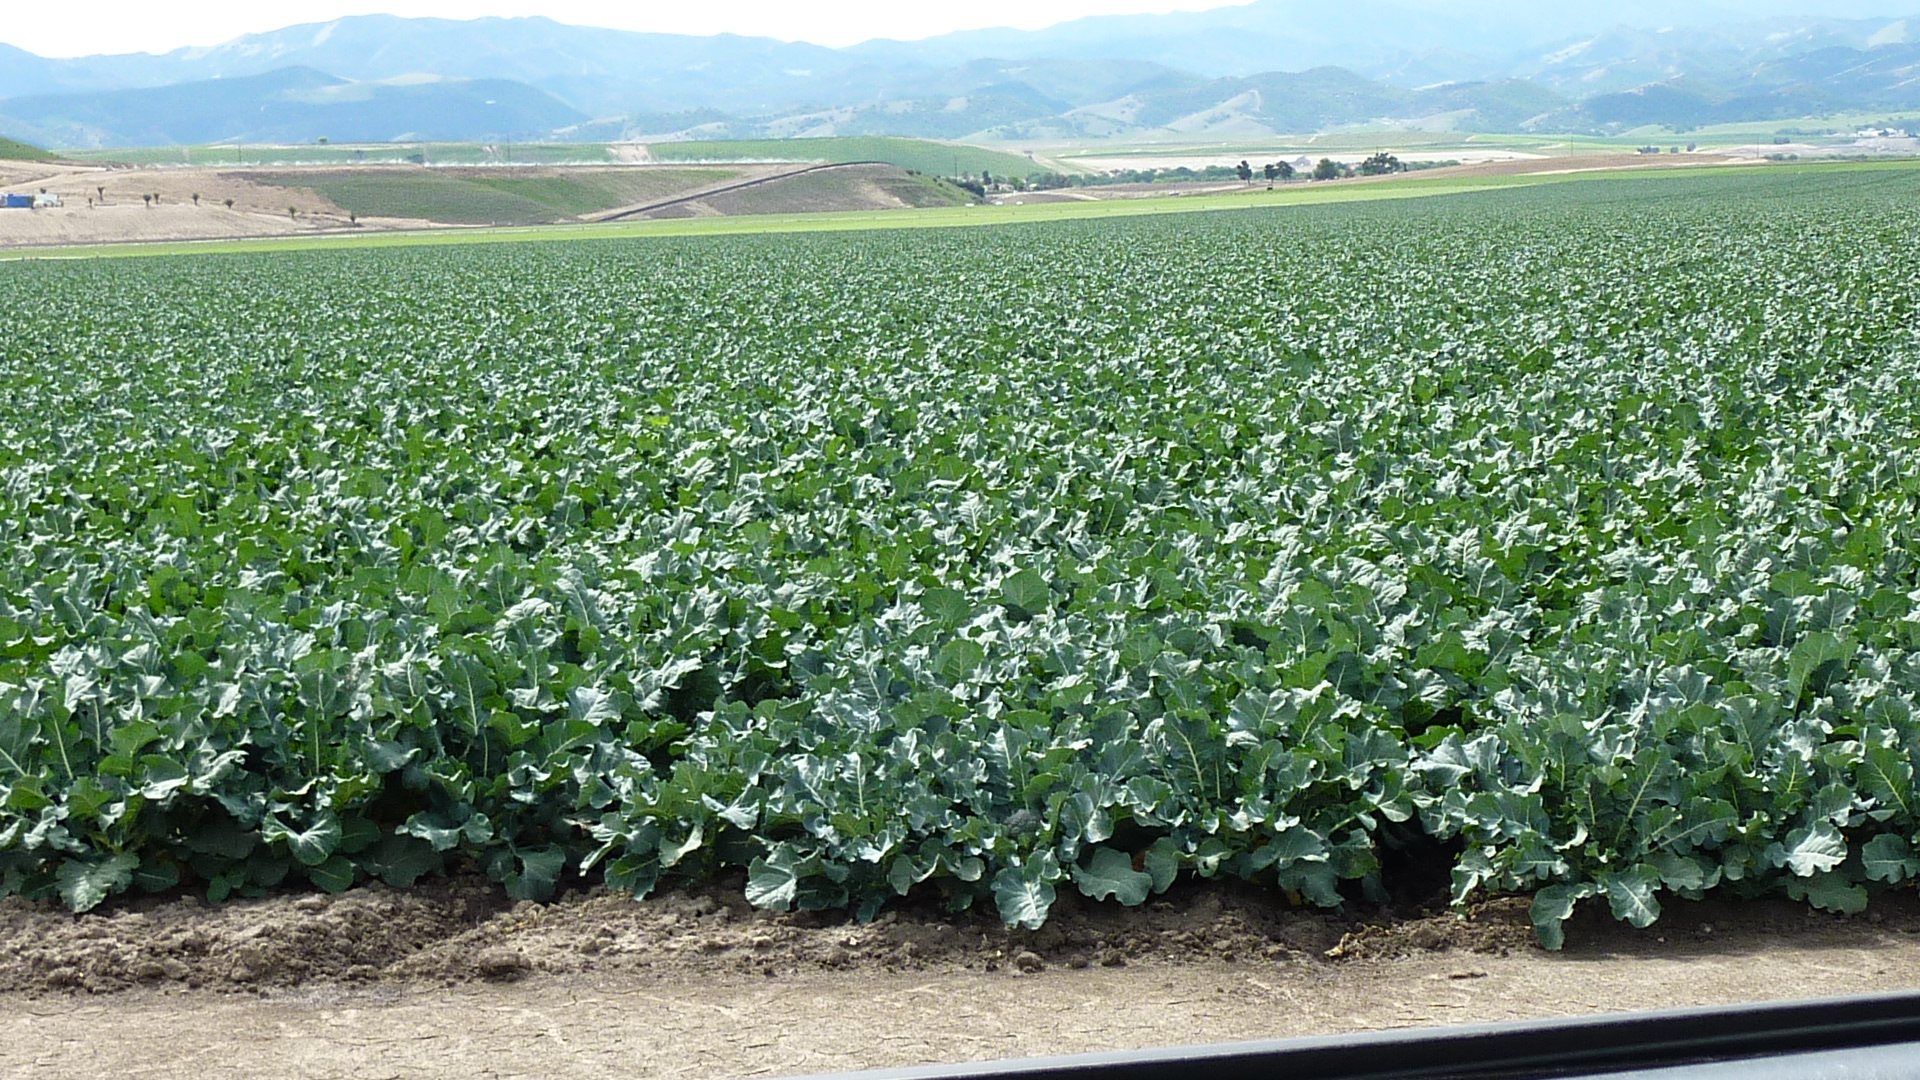 Photo of Broccoli growing with hills in background.